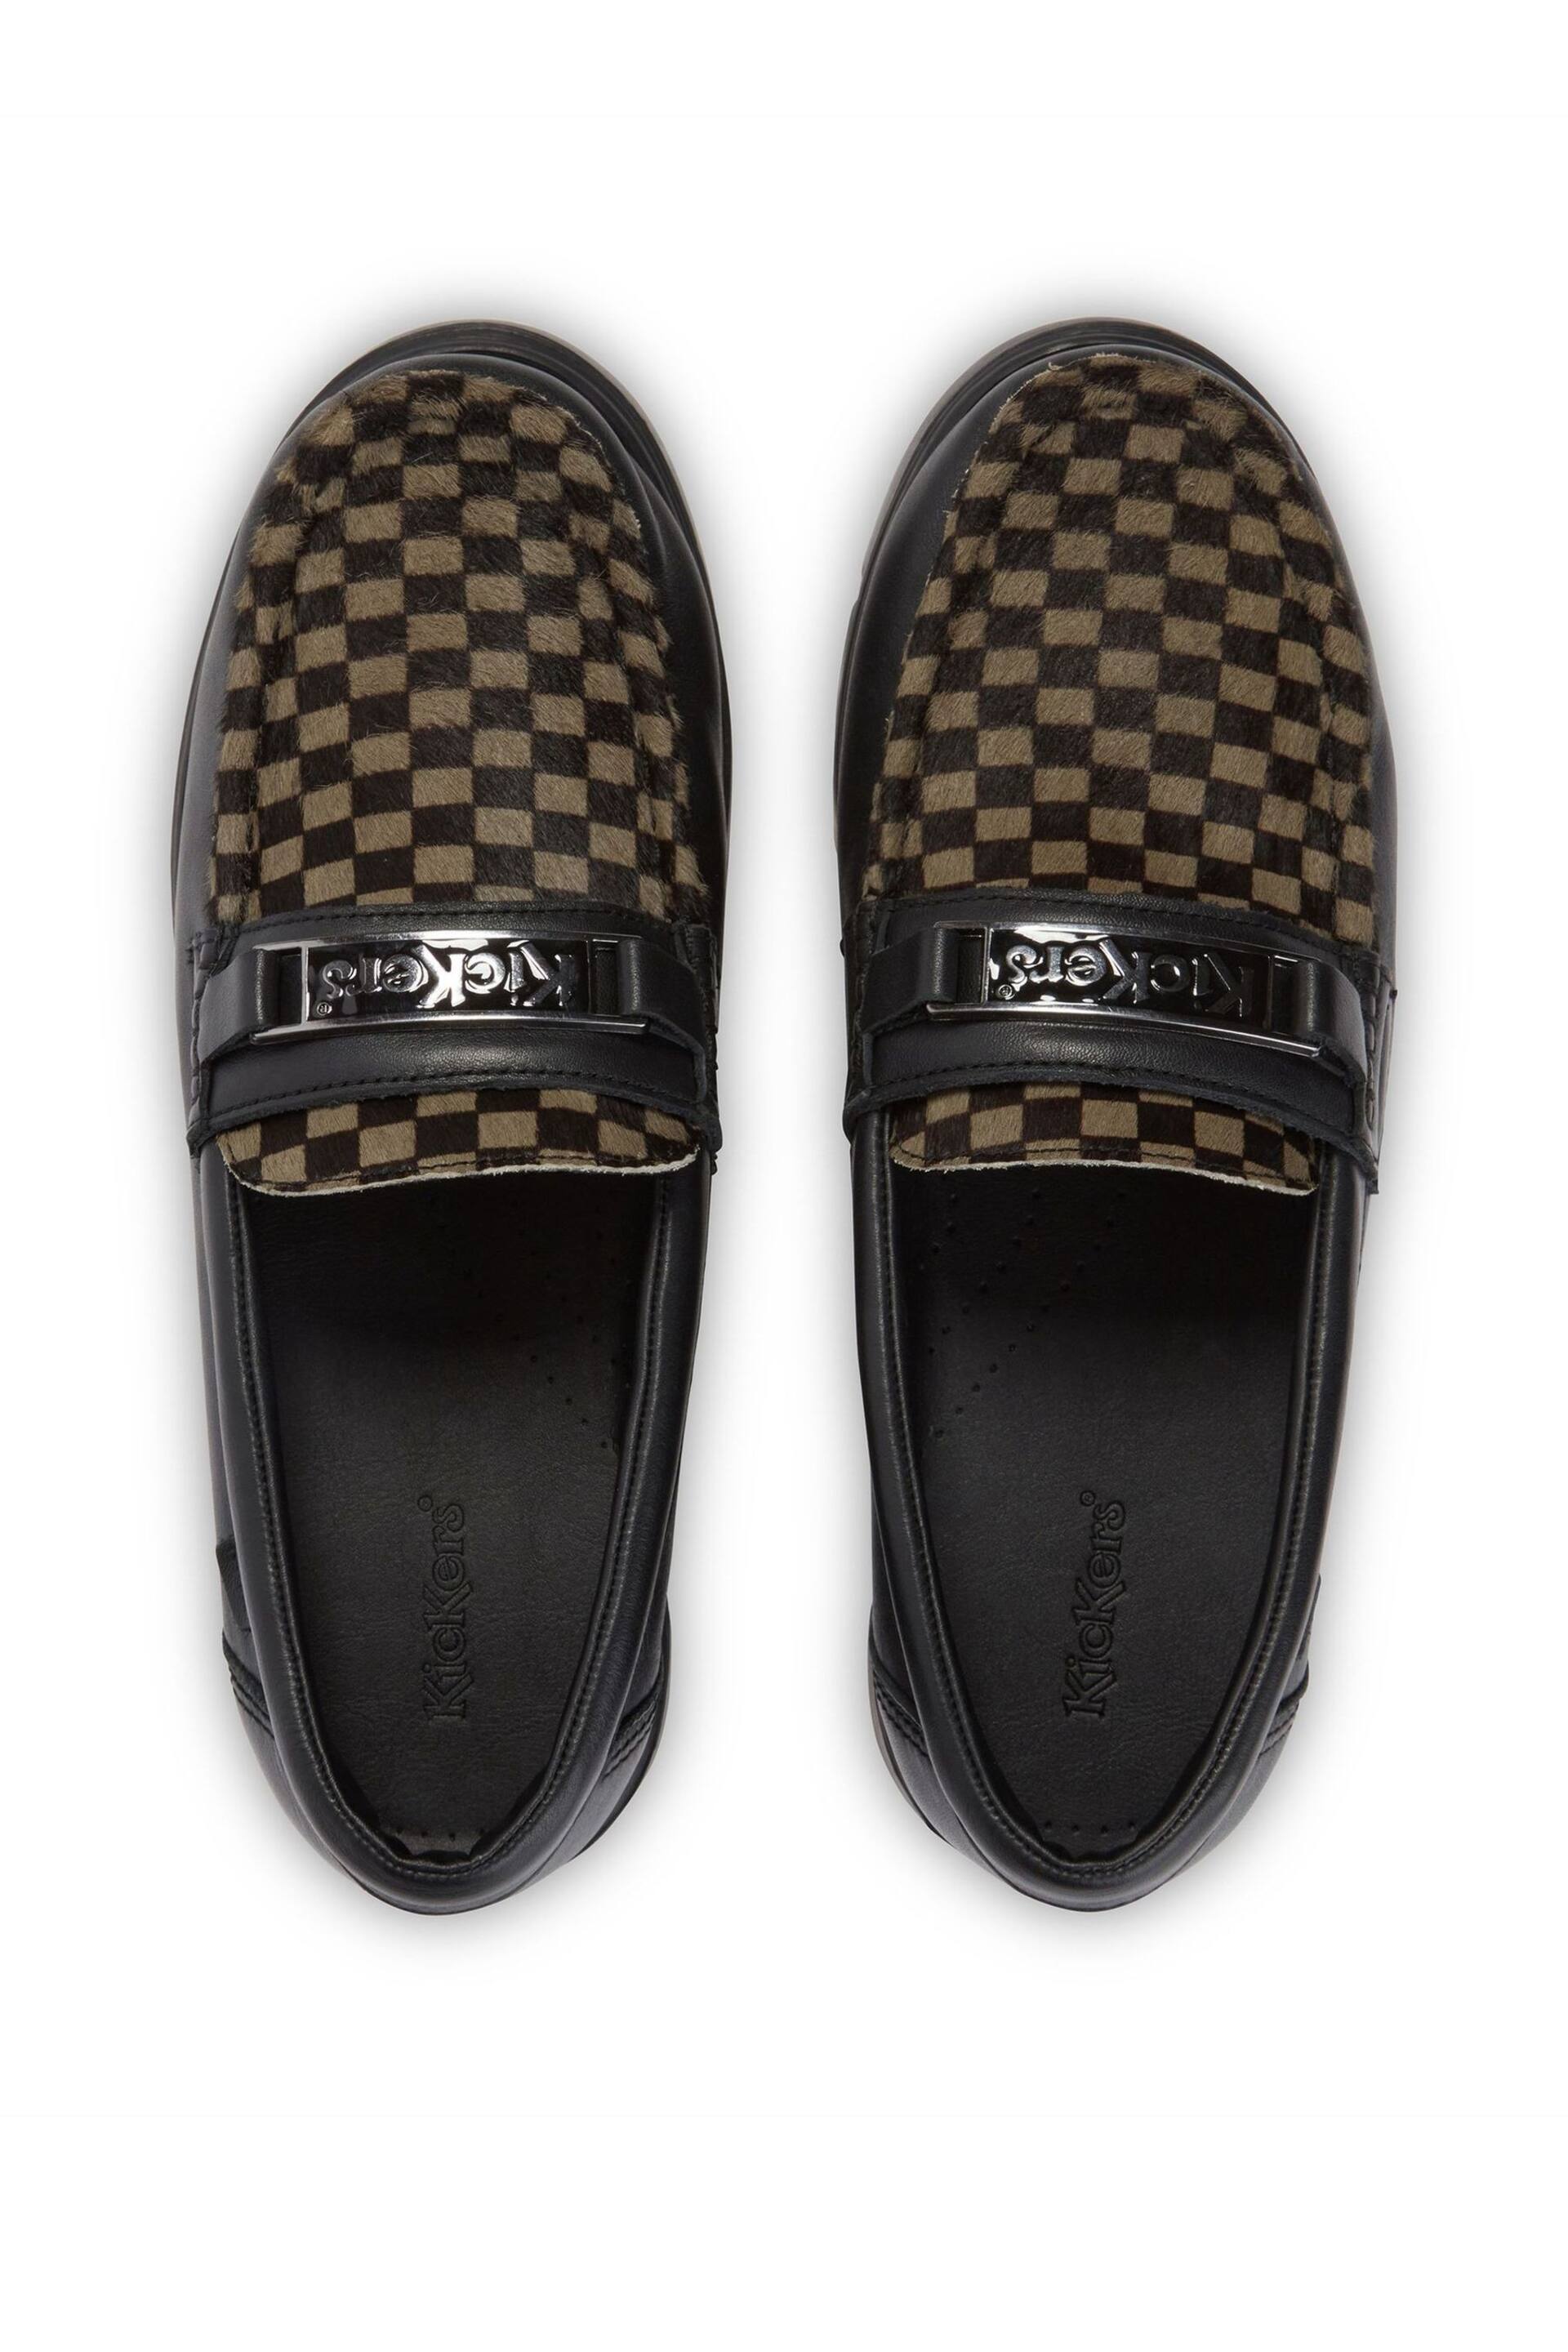 Kickers Lennon Black Loafers - Image 5 of 6